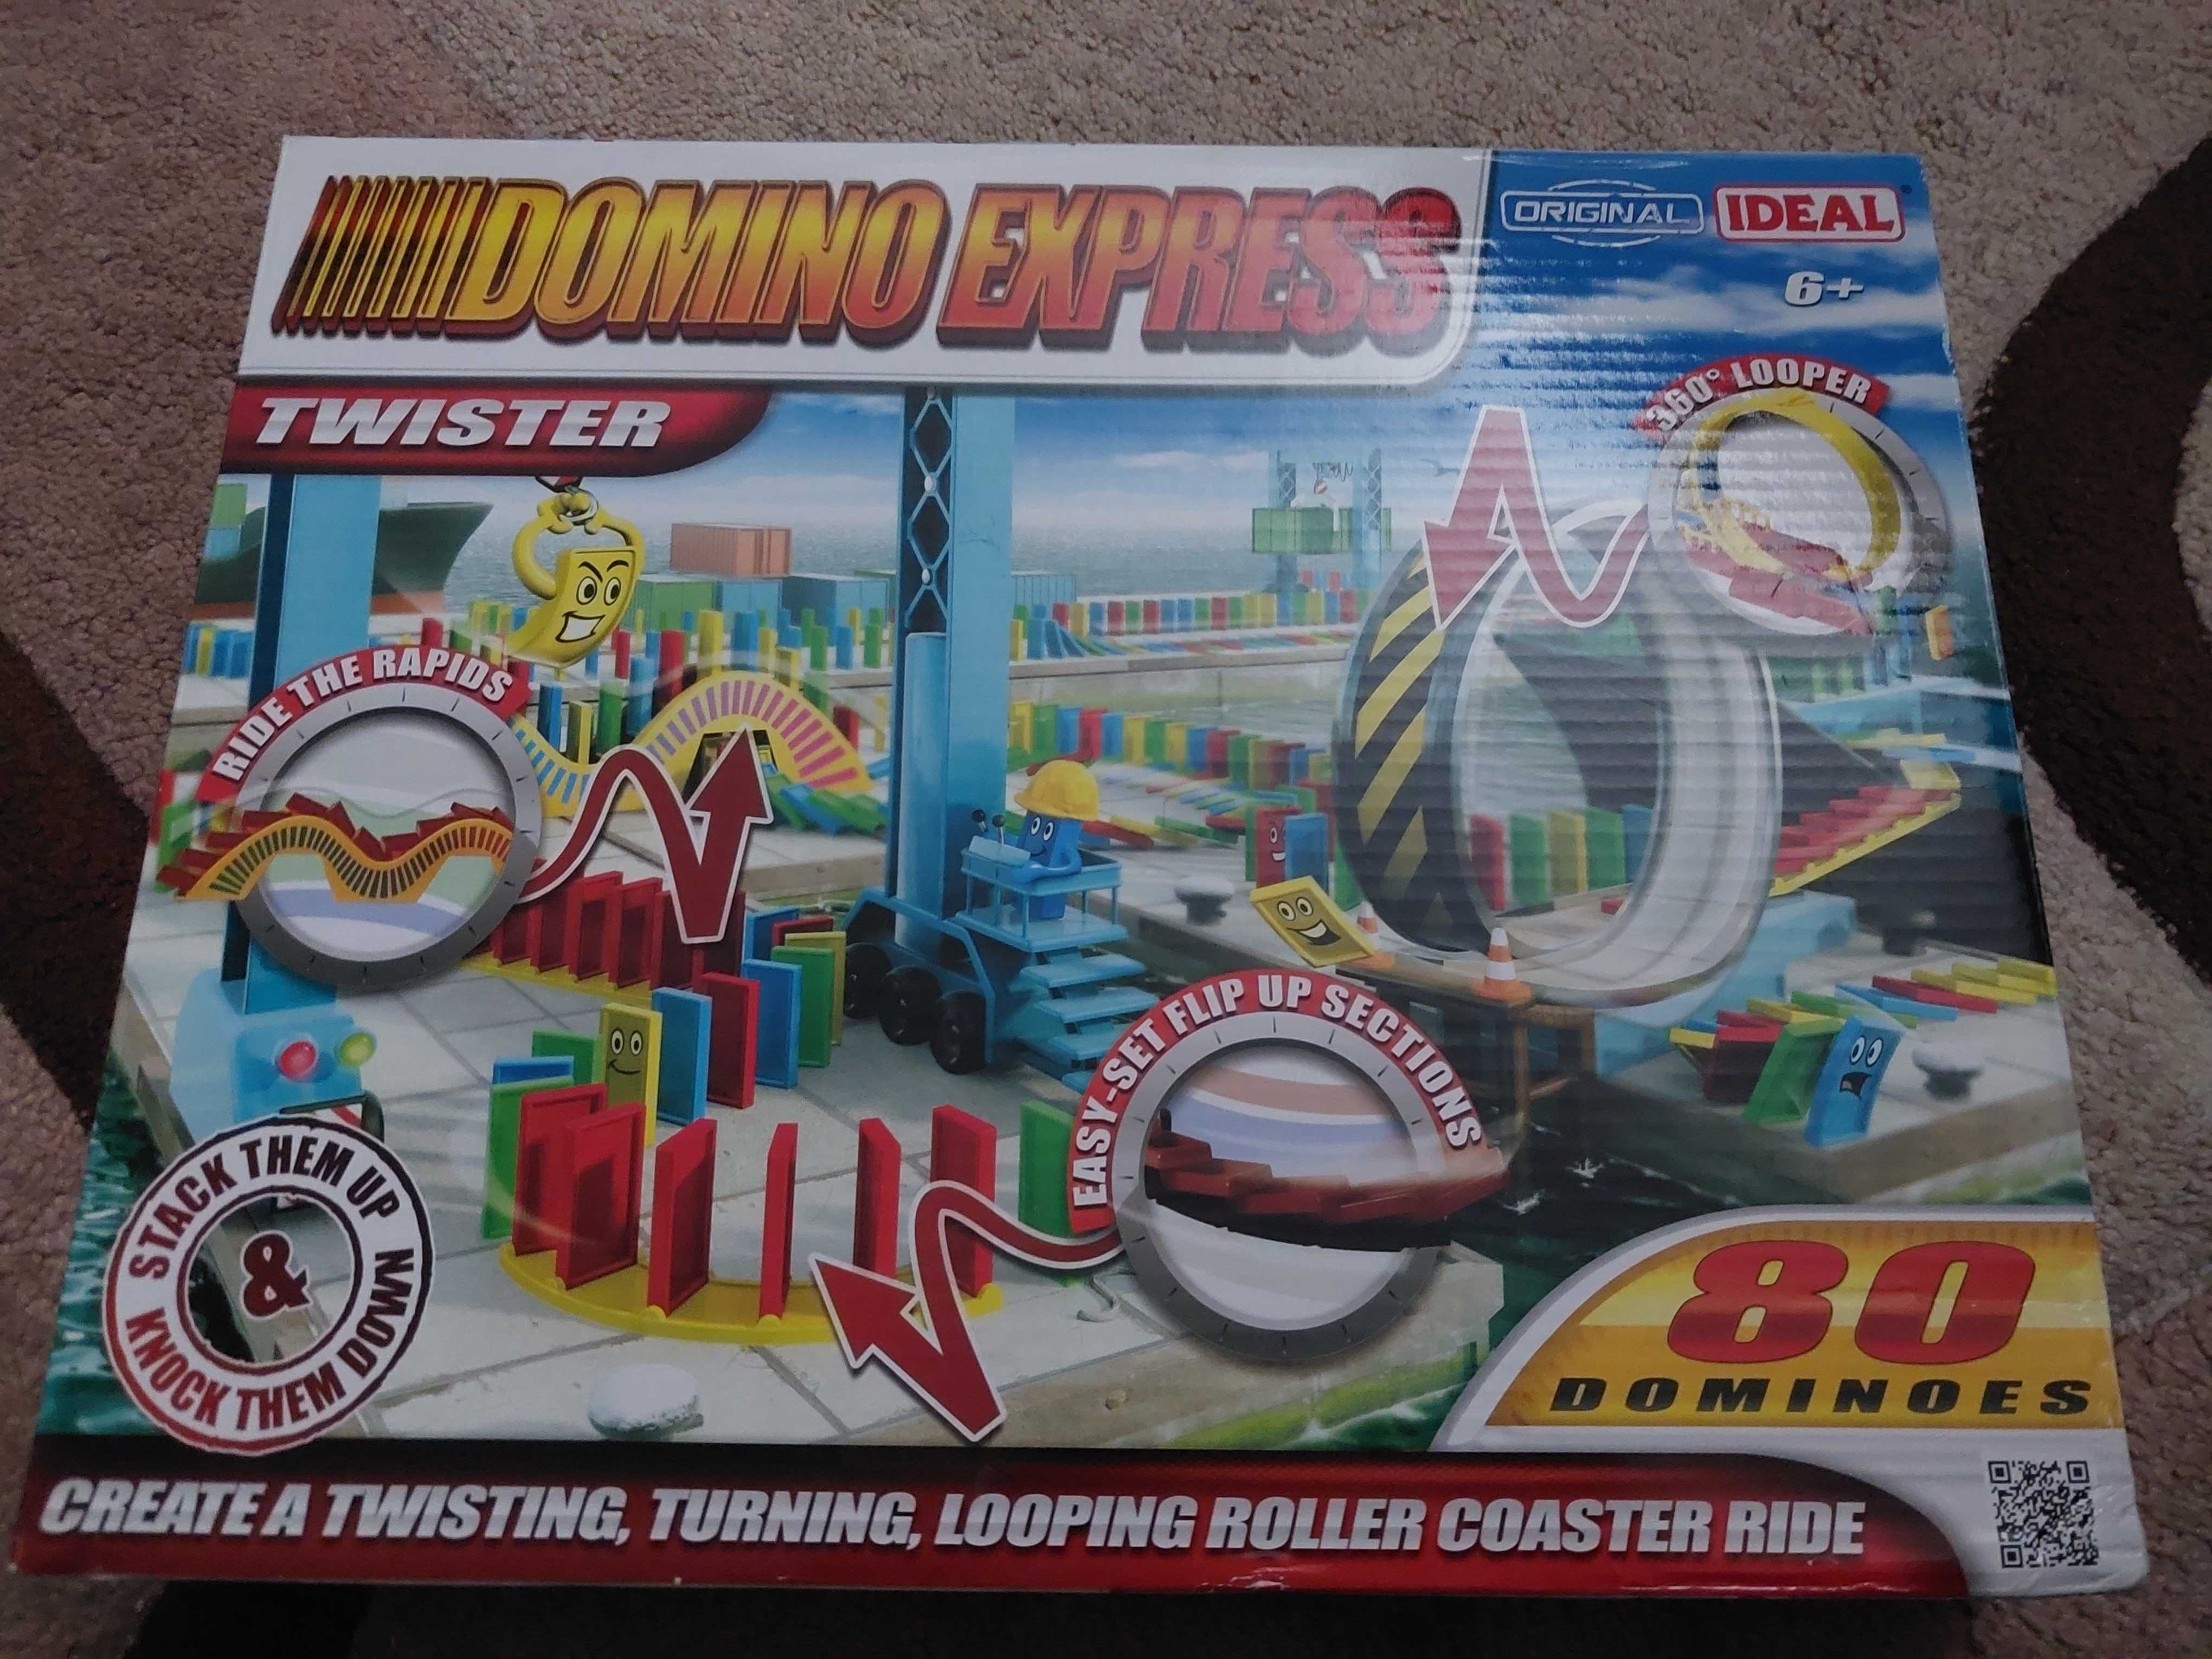 Domino express twister 6+